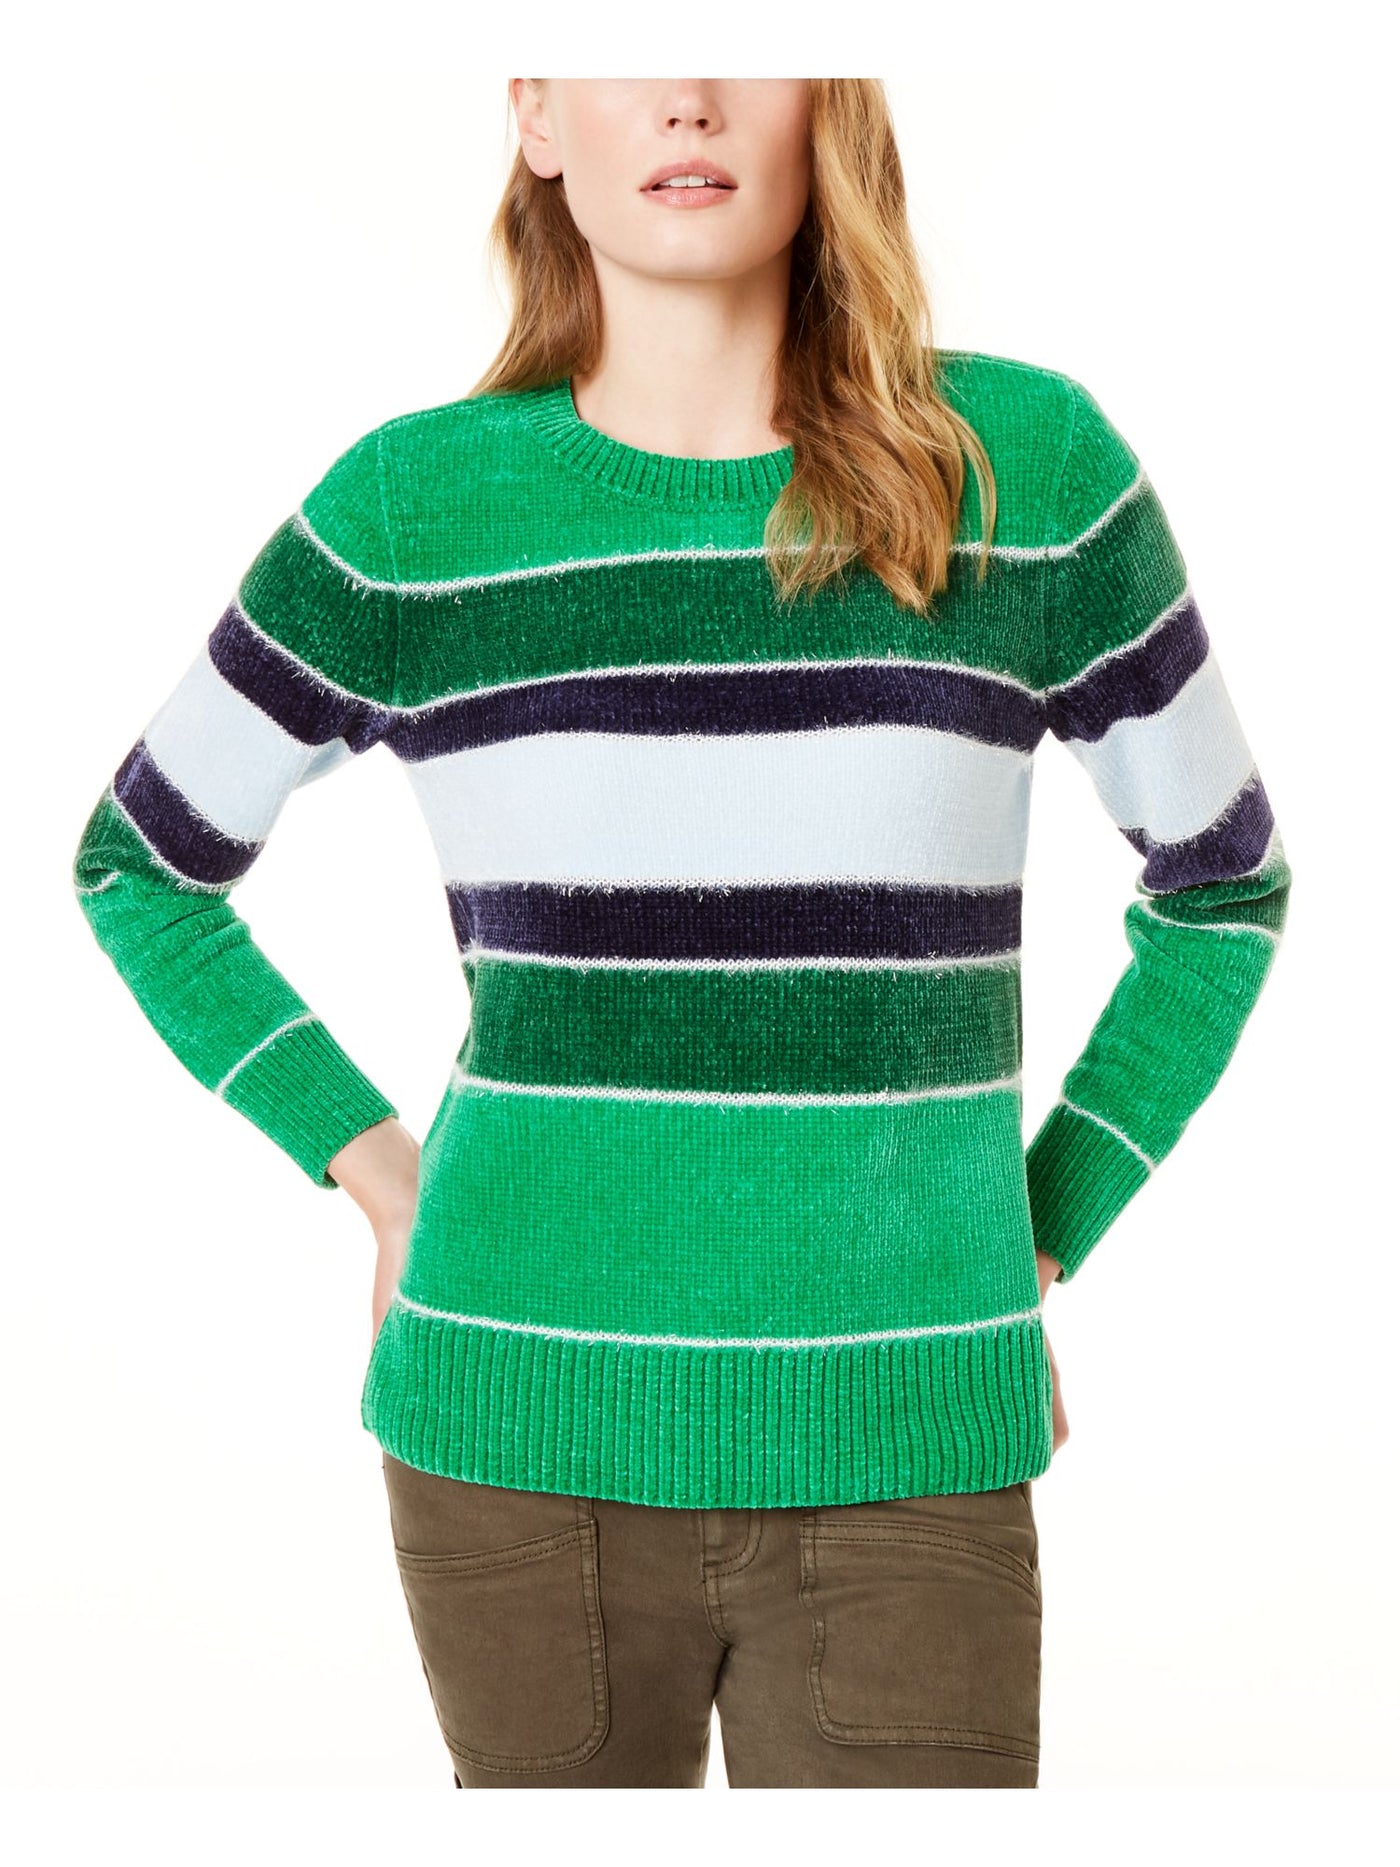 MAISON JULES Womens Green Frayed Color Block Long Sleeve Crew Neck Sweater S